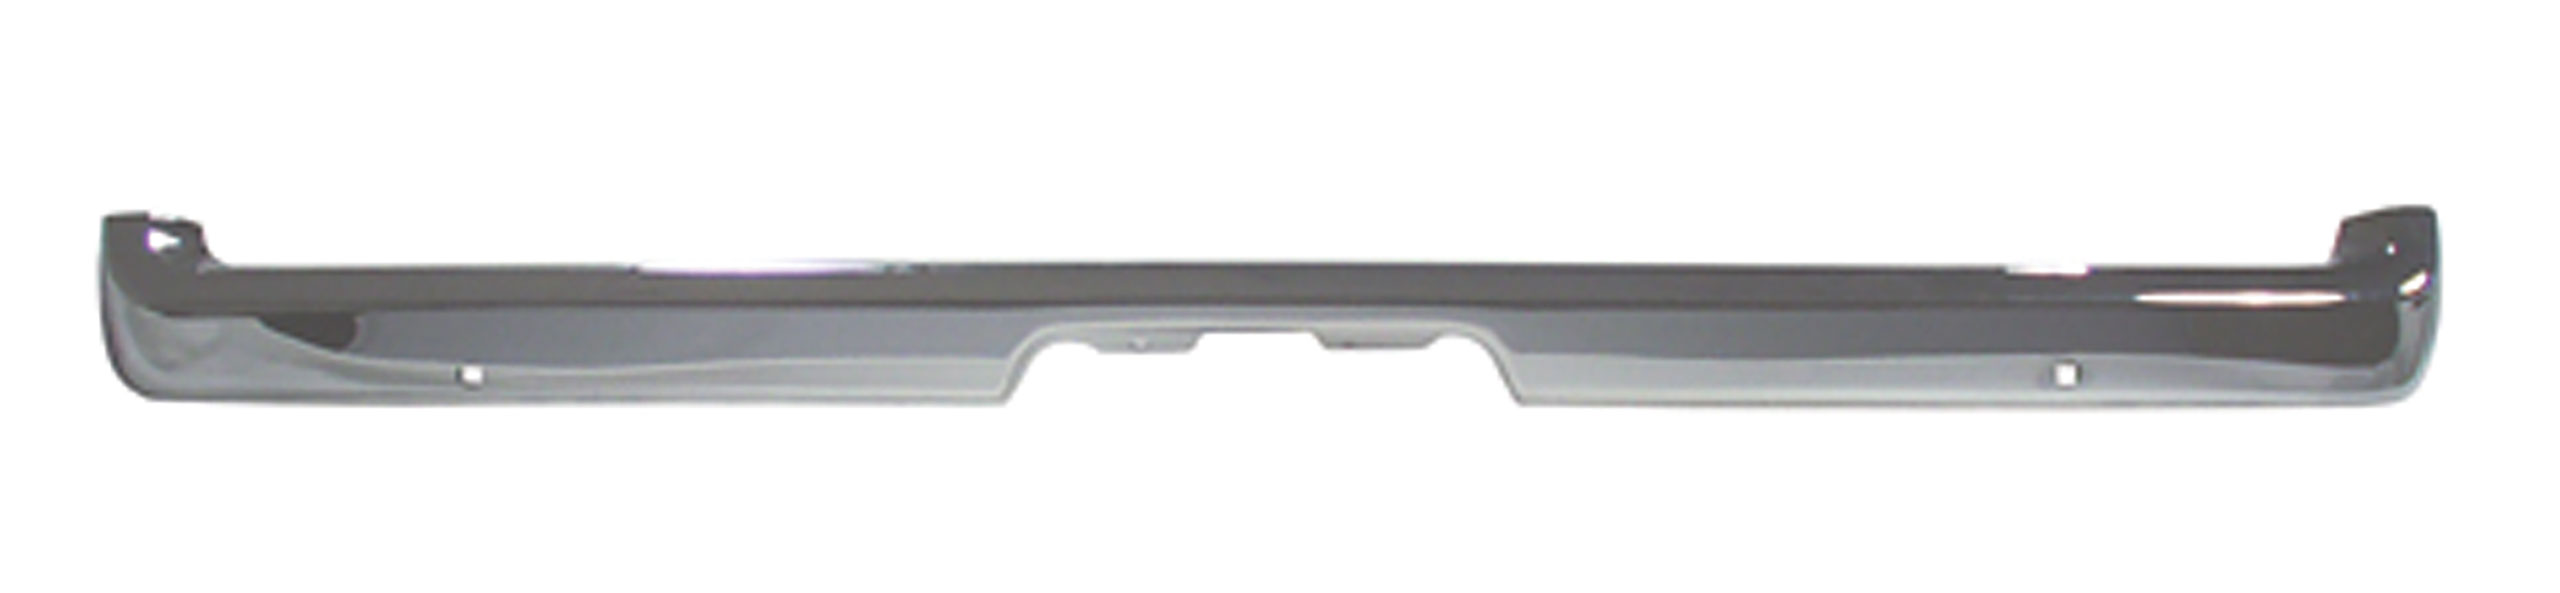 First Generation 1971-1973 Ford Mustang Rear Bumper - Chrome - CA